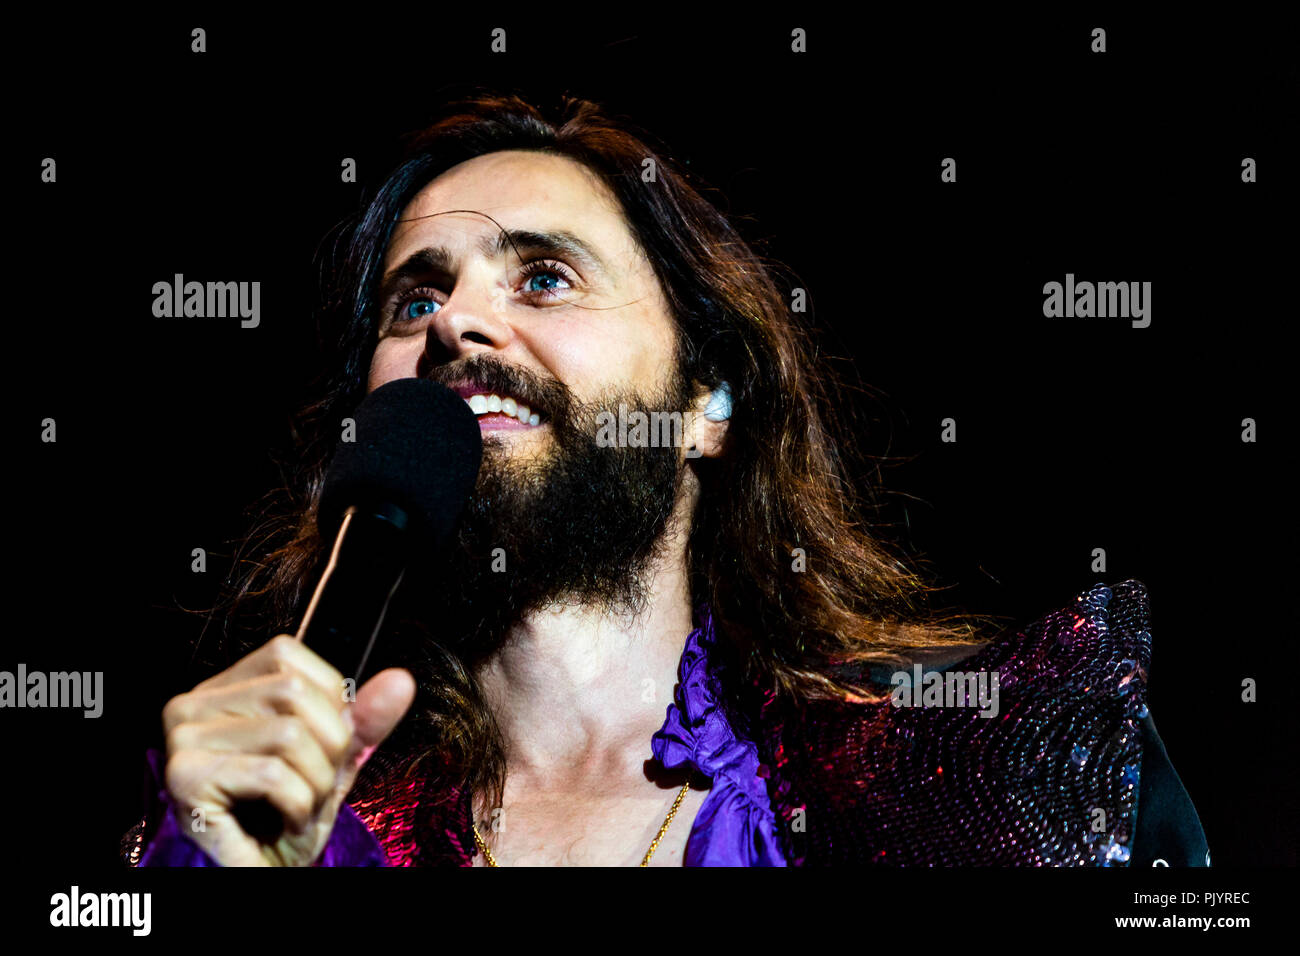 Milan, Italy, 8th September 2018: Thirty Seconds to Mars (Jared and Shannon Leto) perform on stage at Milano Rocks in Italy, at Area Experience in Milan, for their European Tour 2018 - Valeria Portinari/Alamy Live News Stock Photo